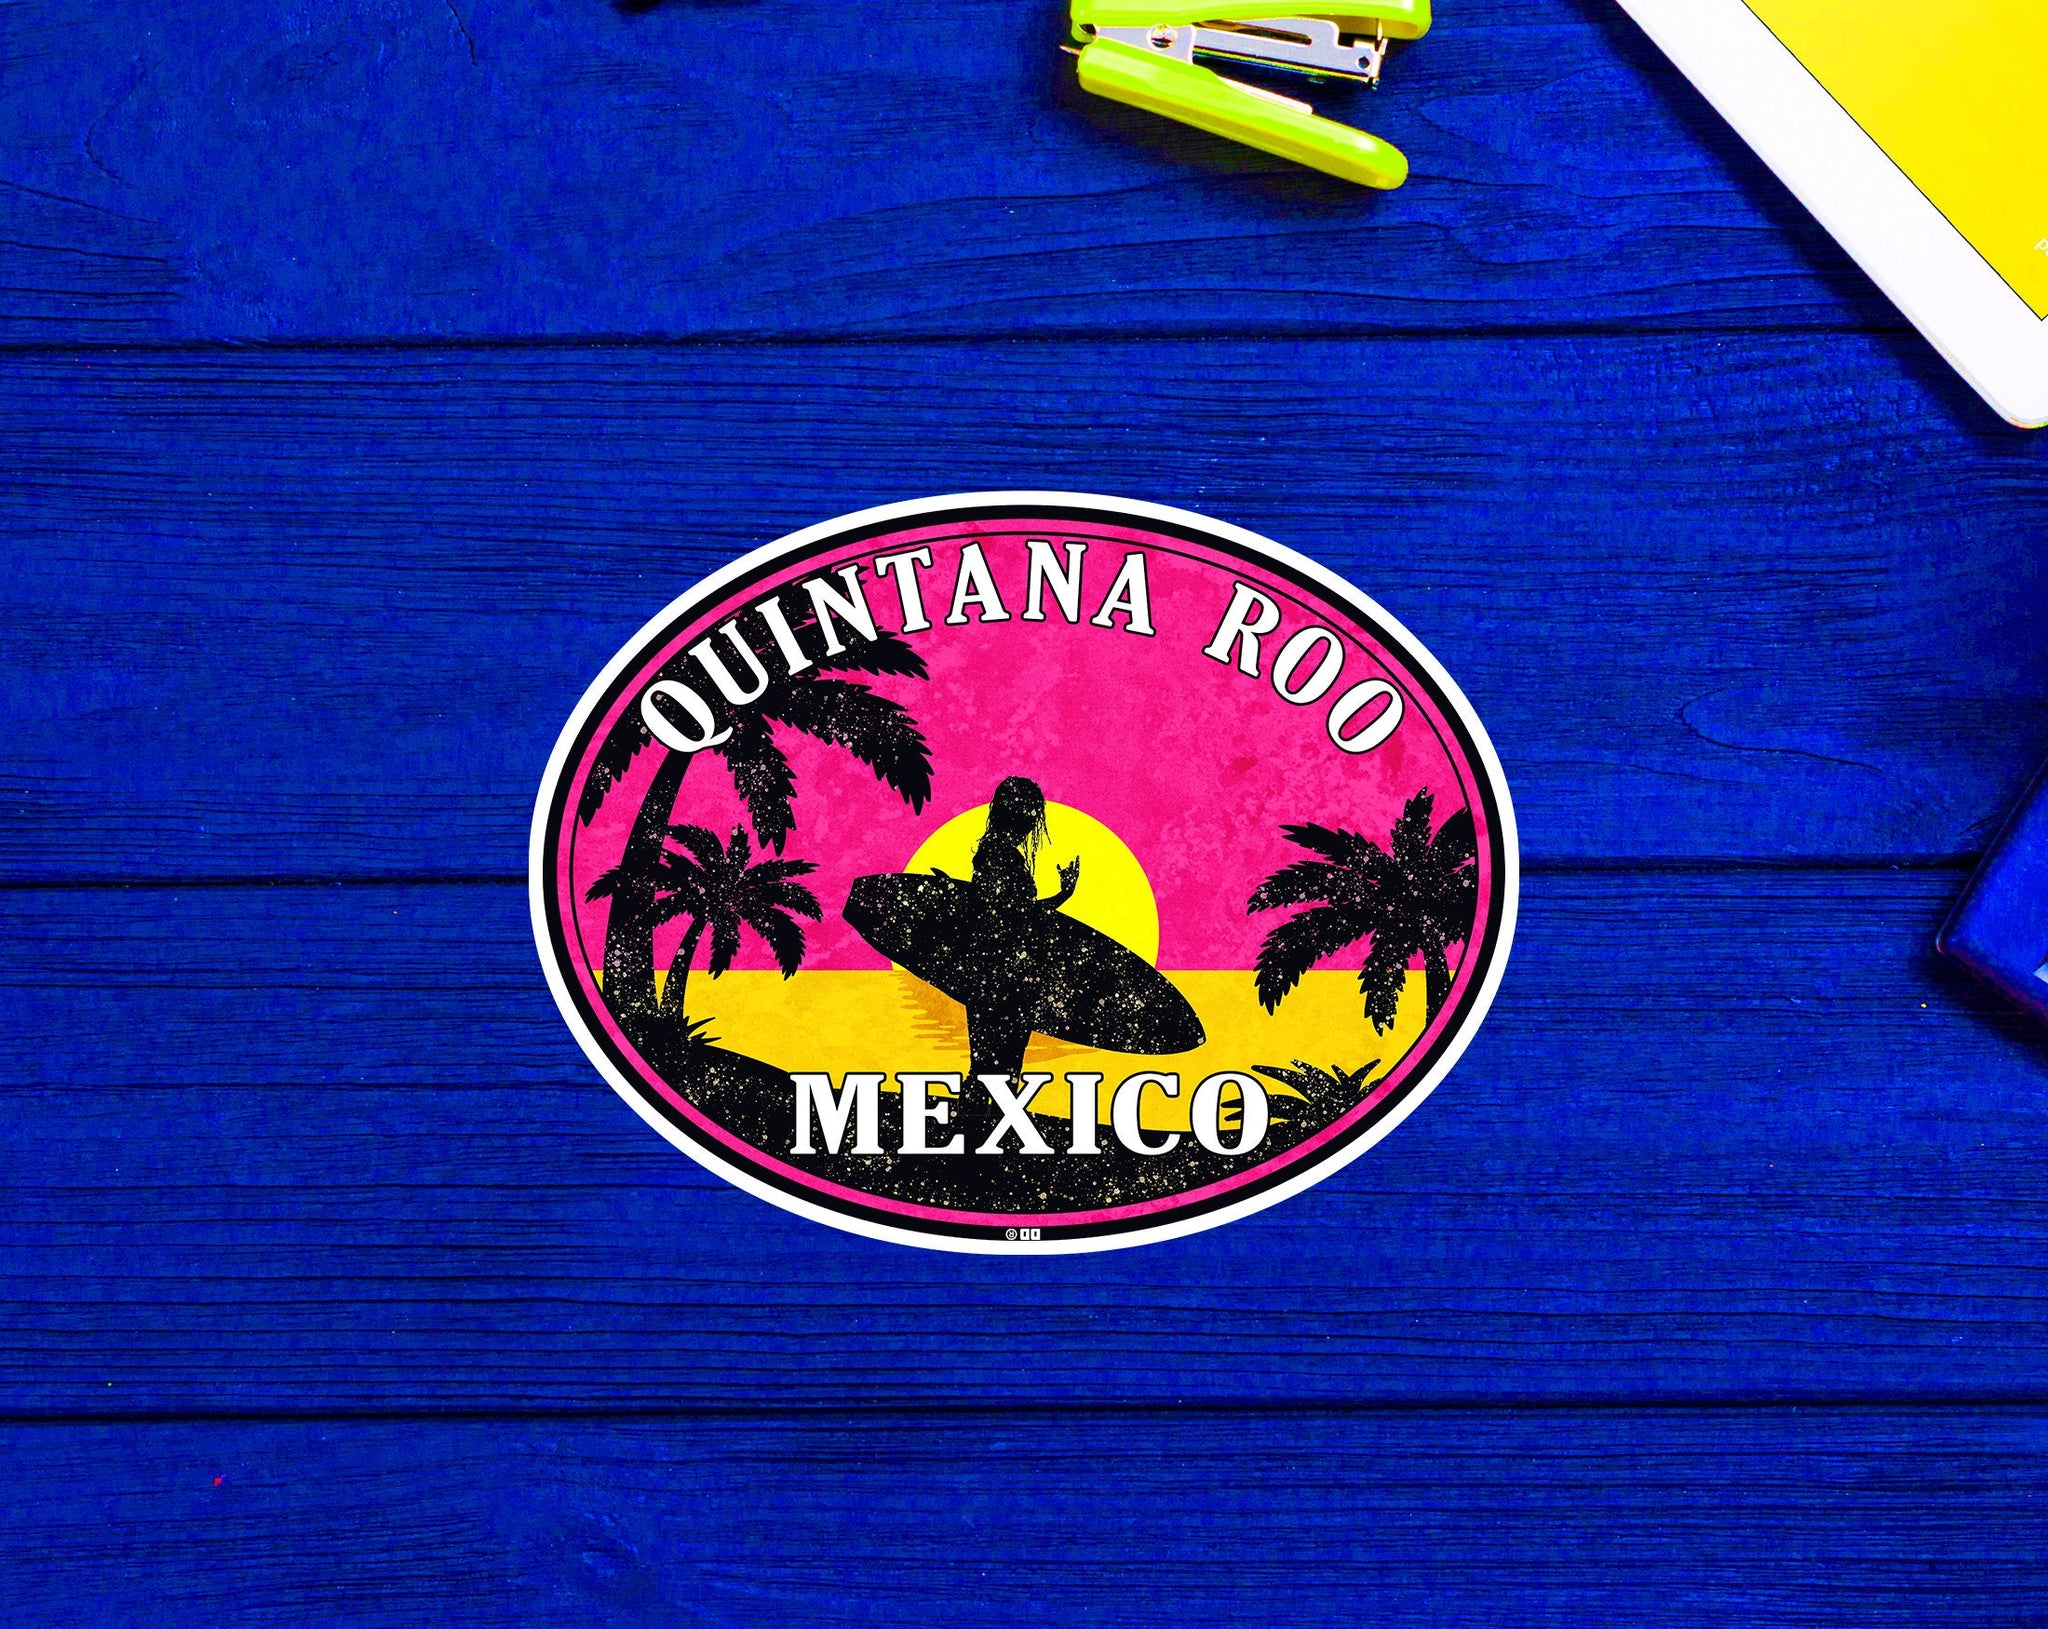 Quintana Roo Mexico Cancun Laptop Bumper Surfing Surf Isla Mujeres Sticker 3.9"